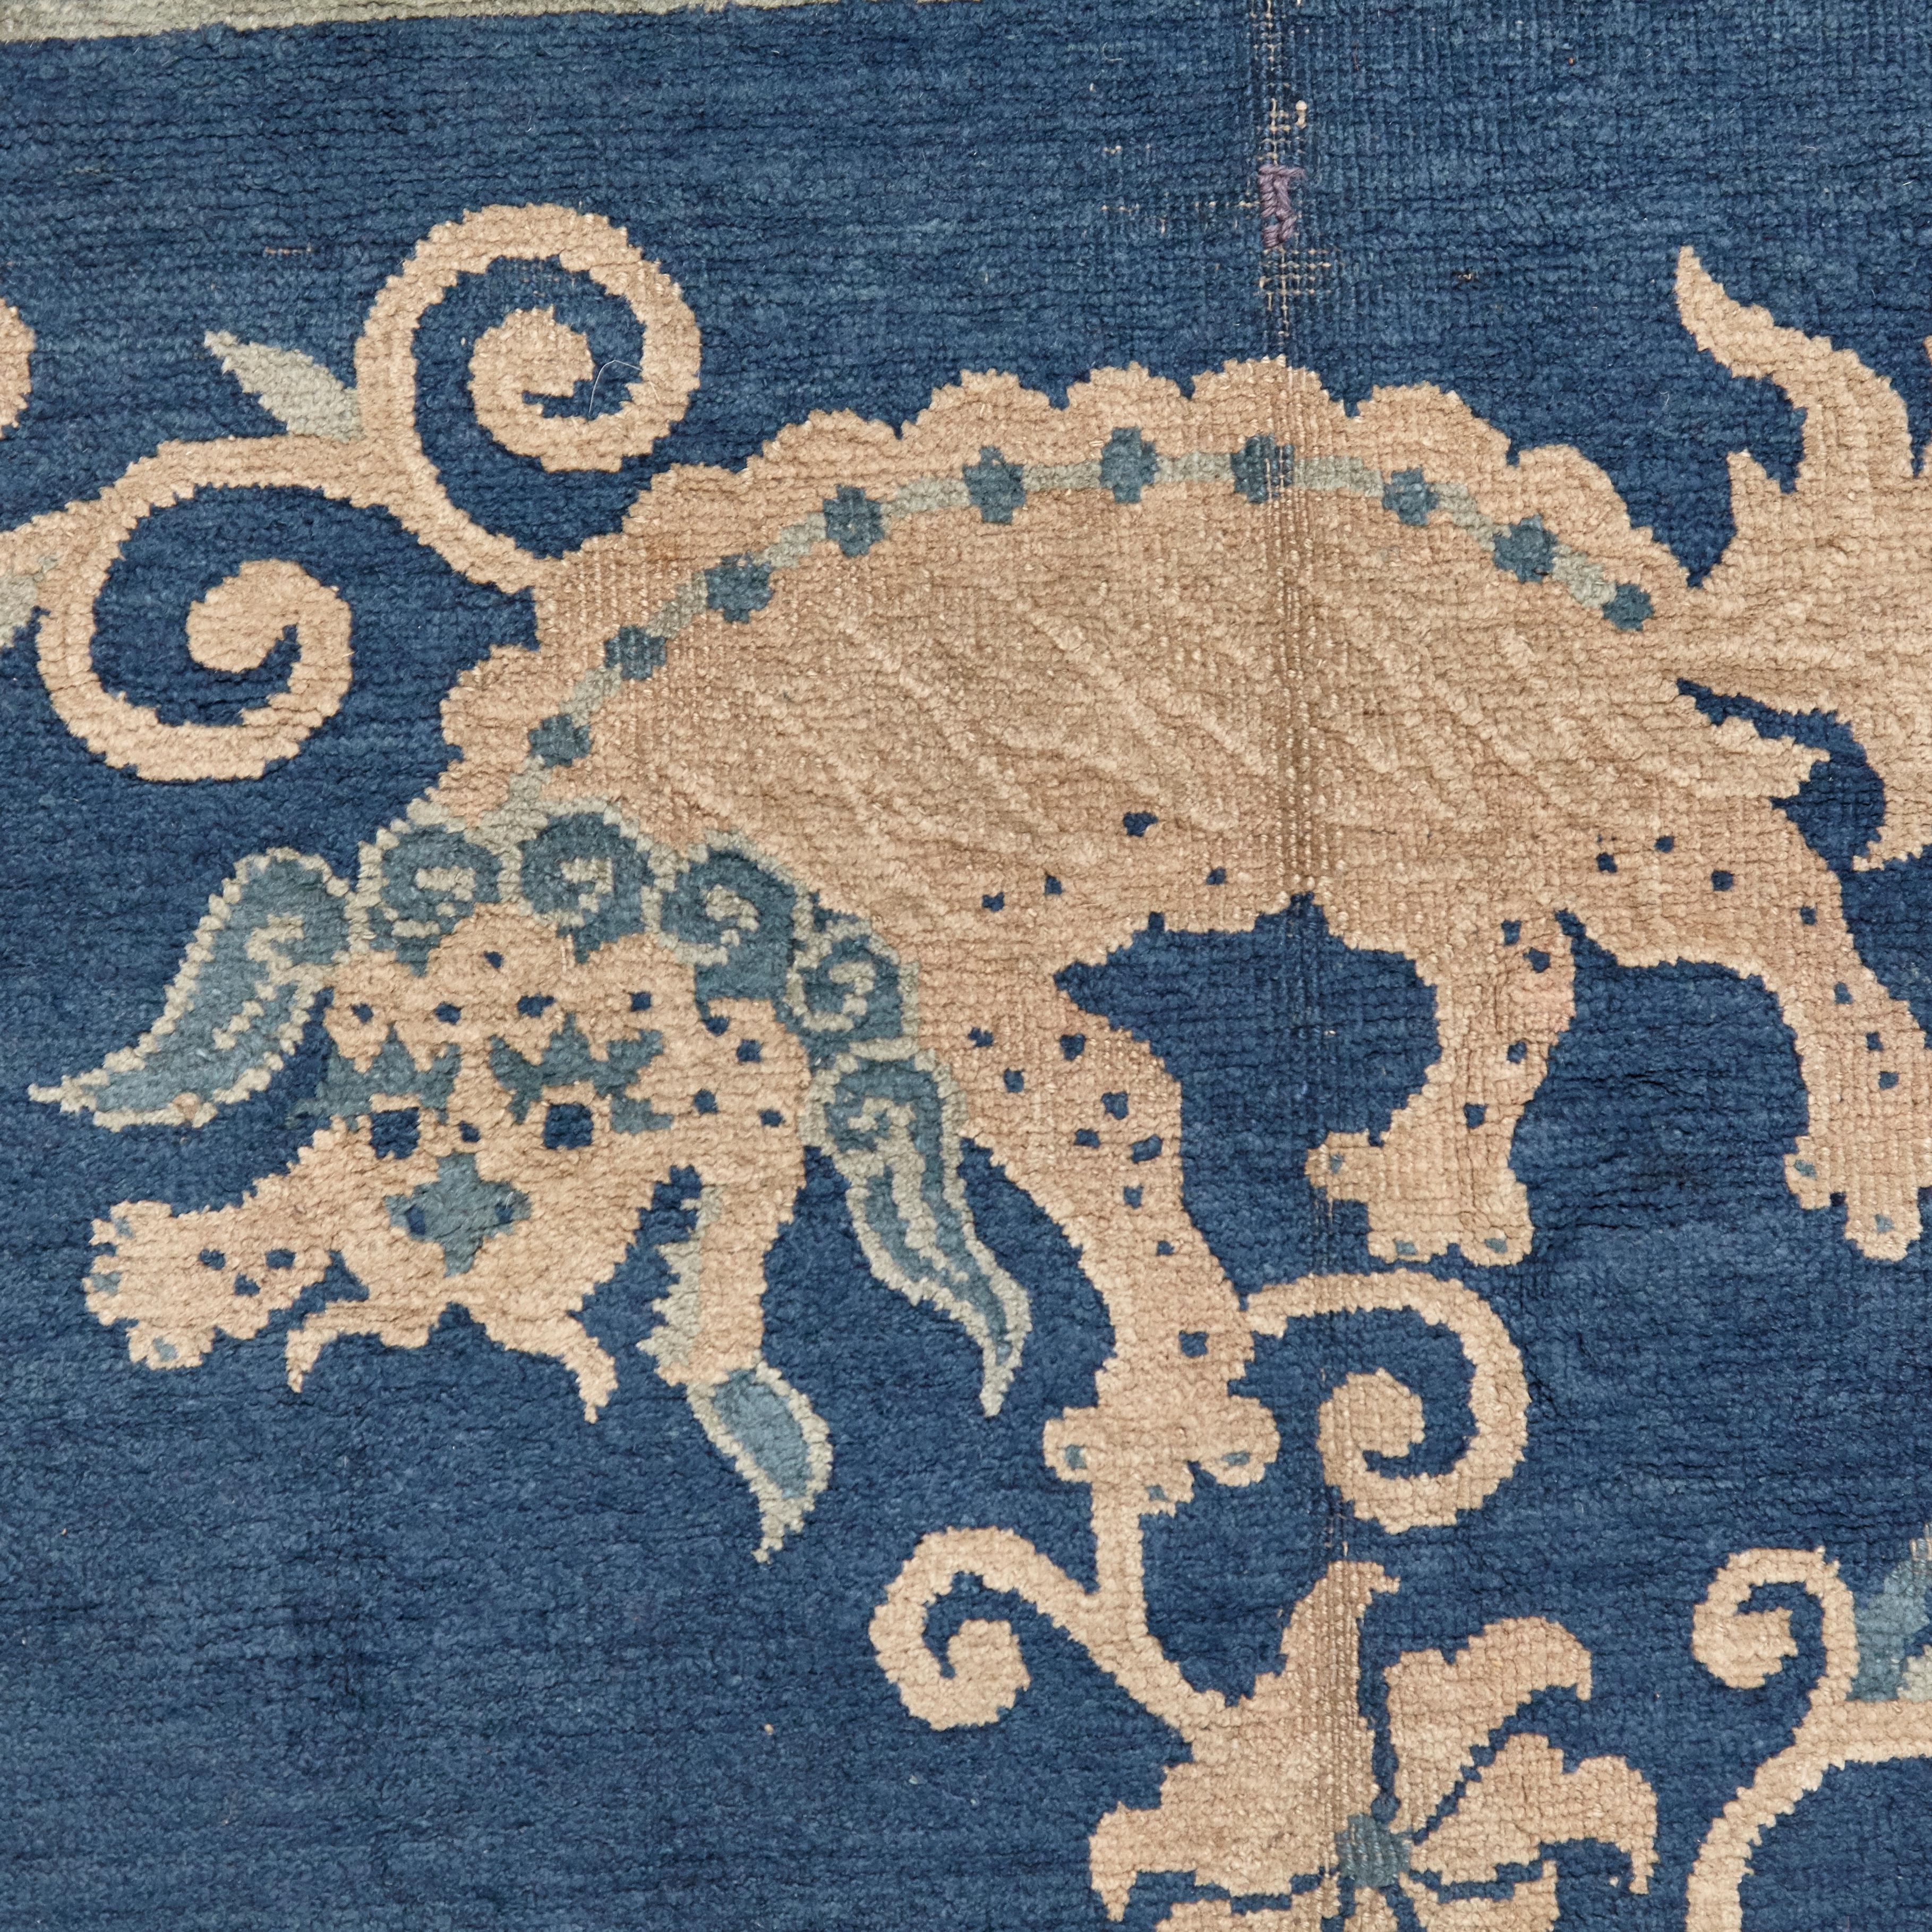 Ningshia, Chinese Export, Hand Knotted Wool, Antique Rug, circa 1890 5